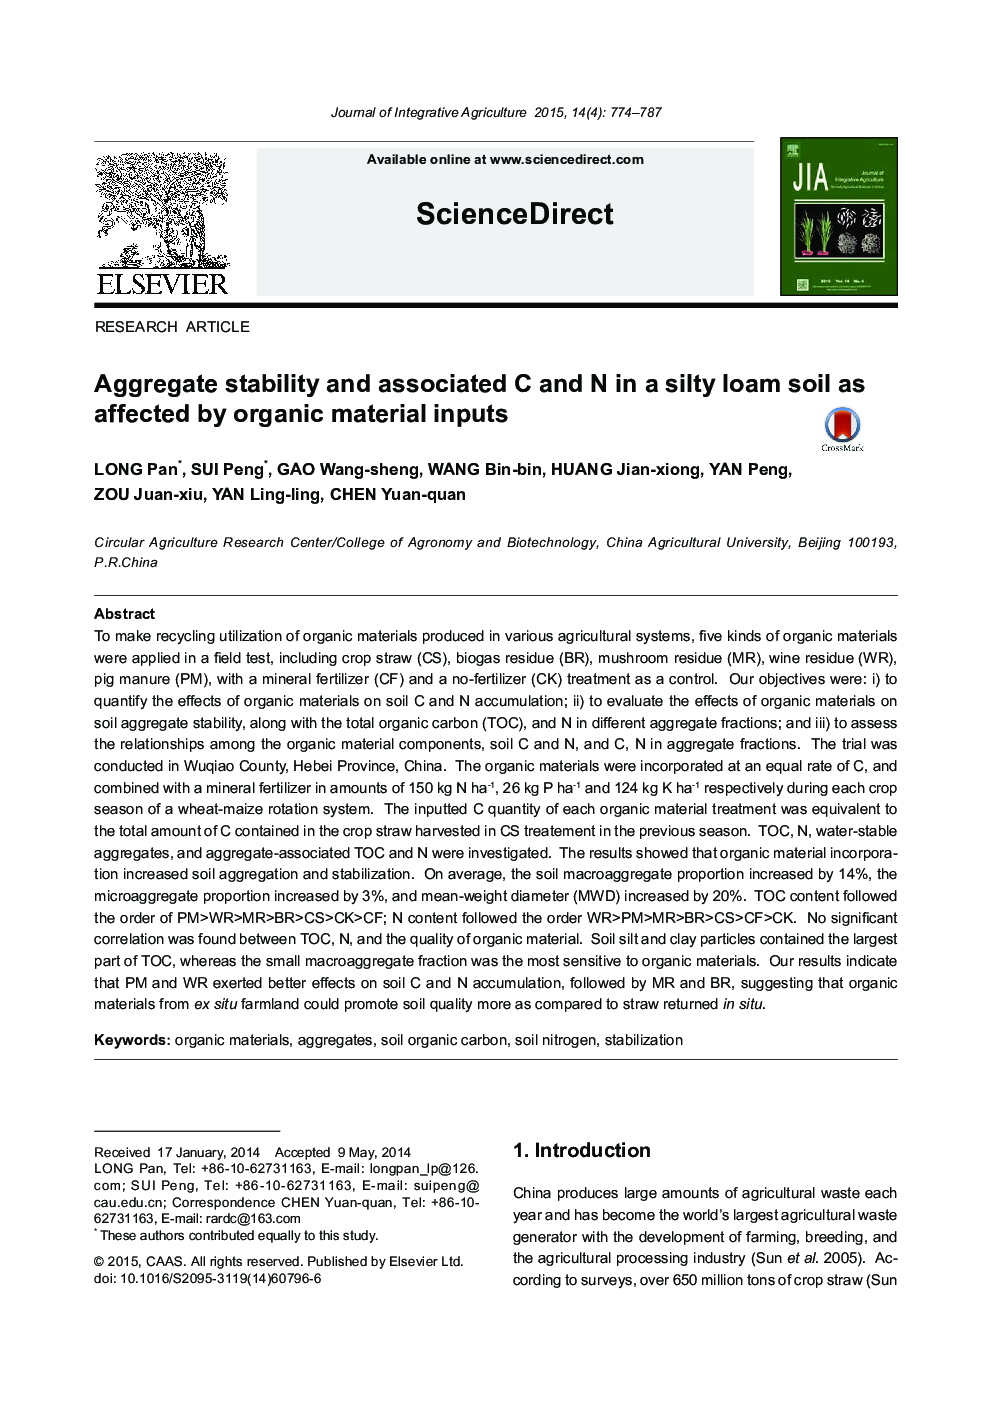 Aggregate stability and associated C and N in a silty loam soil as affected by organic material inputs